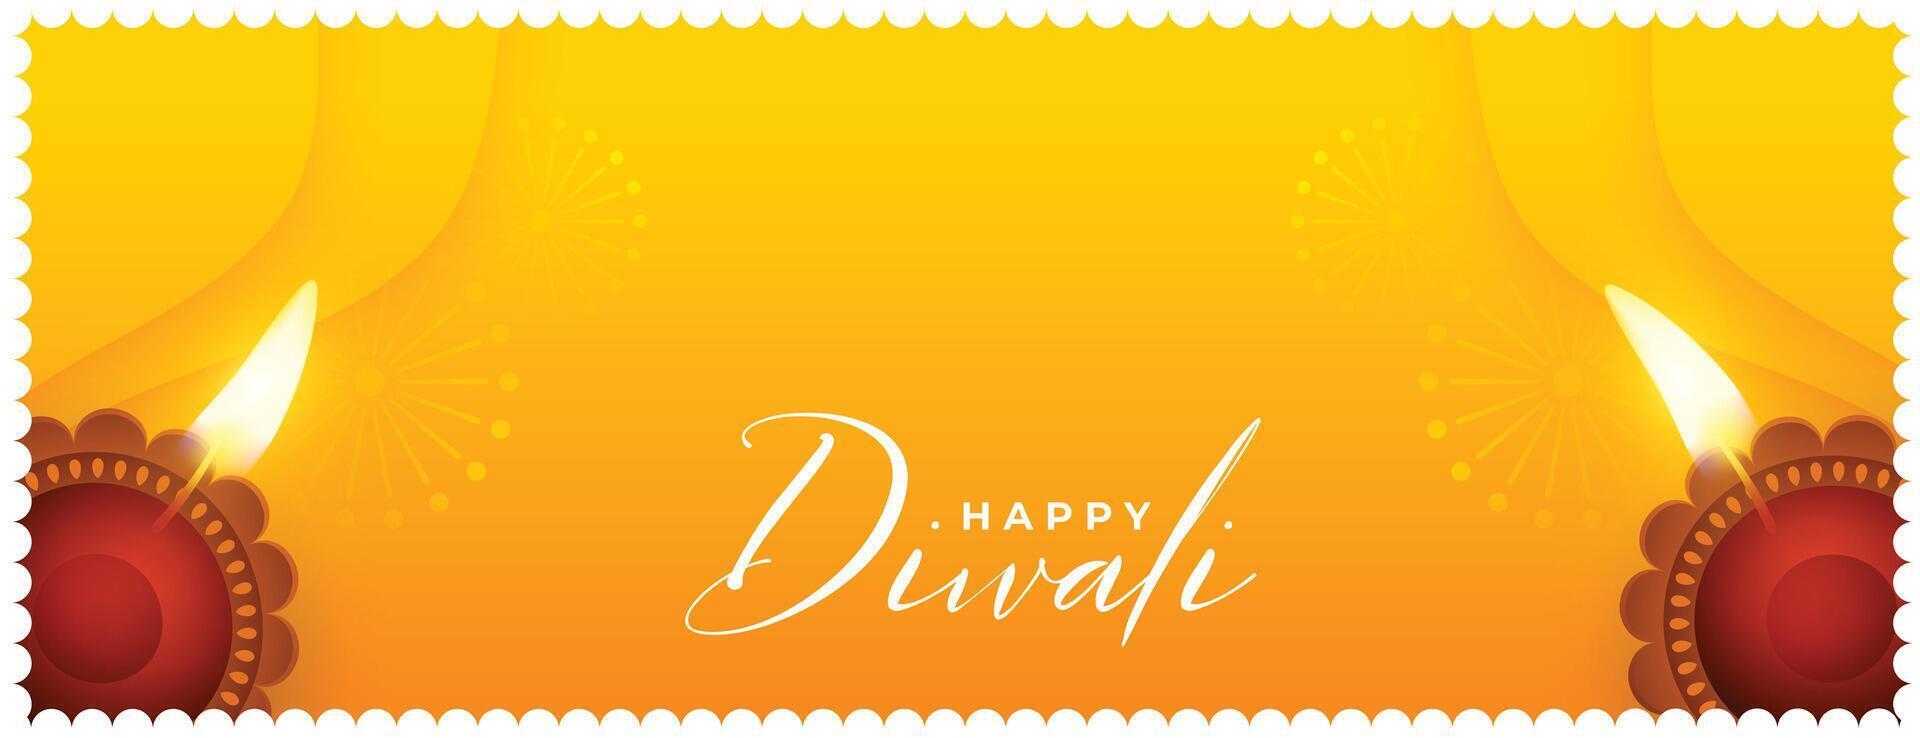 happy diwali religious banner with realistic oil lamp design vector